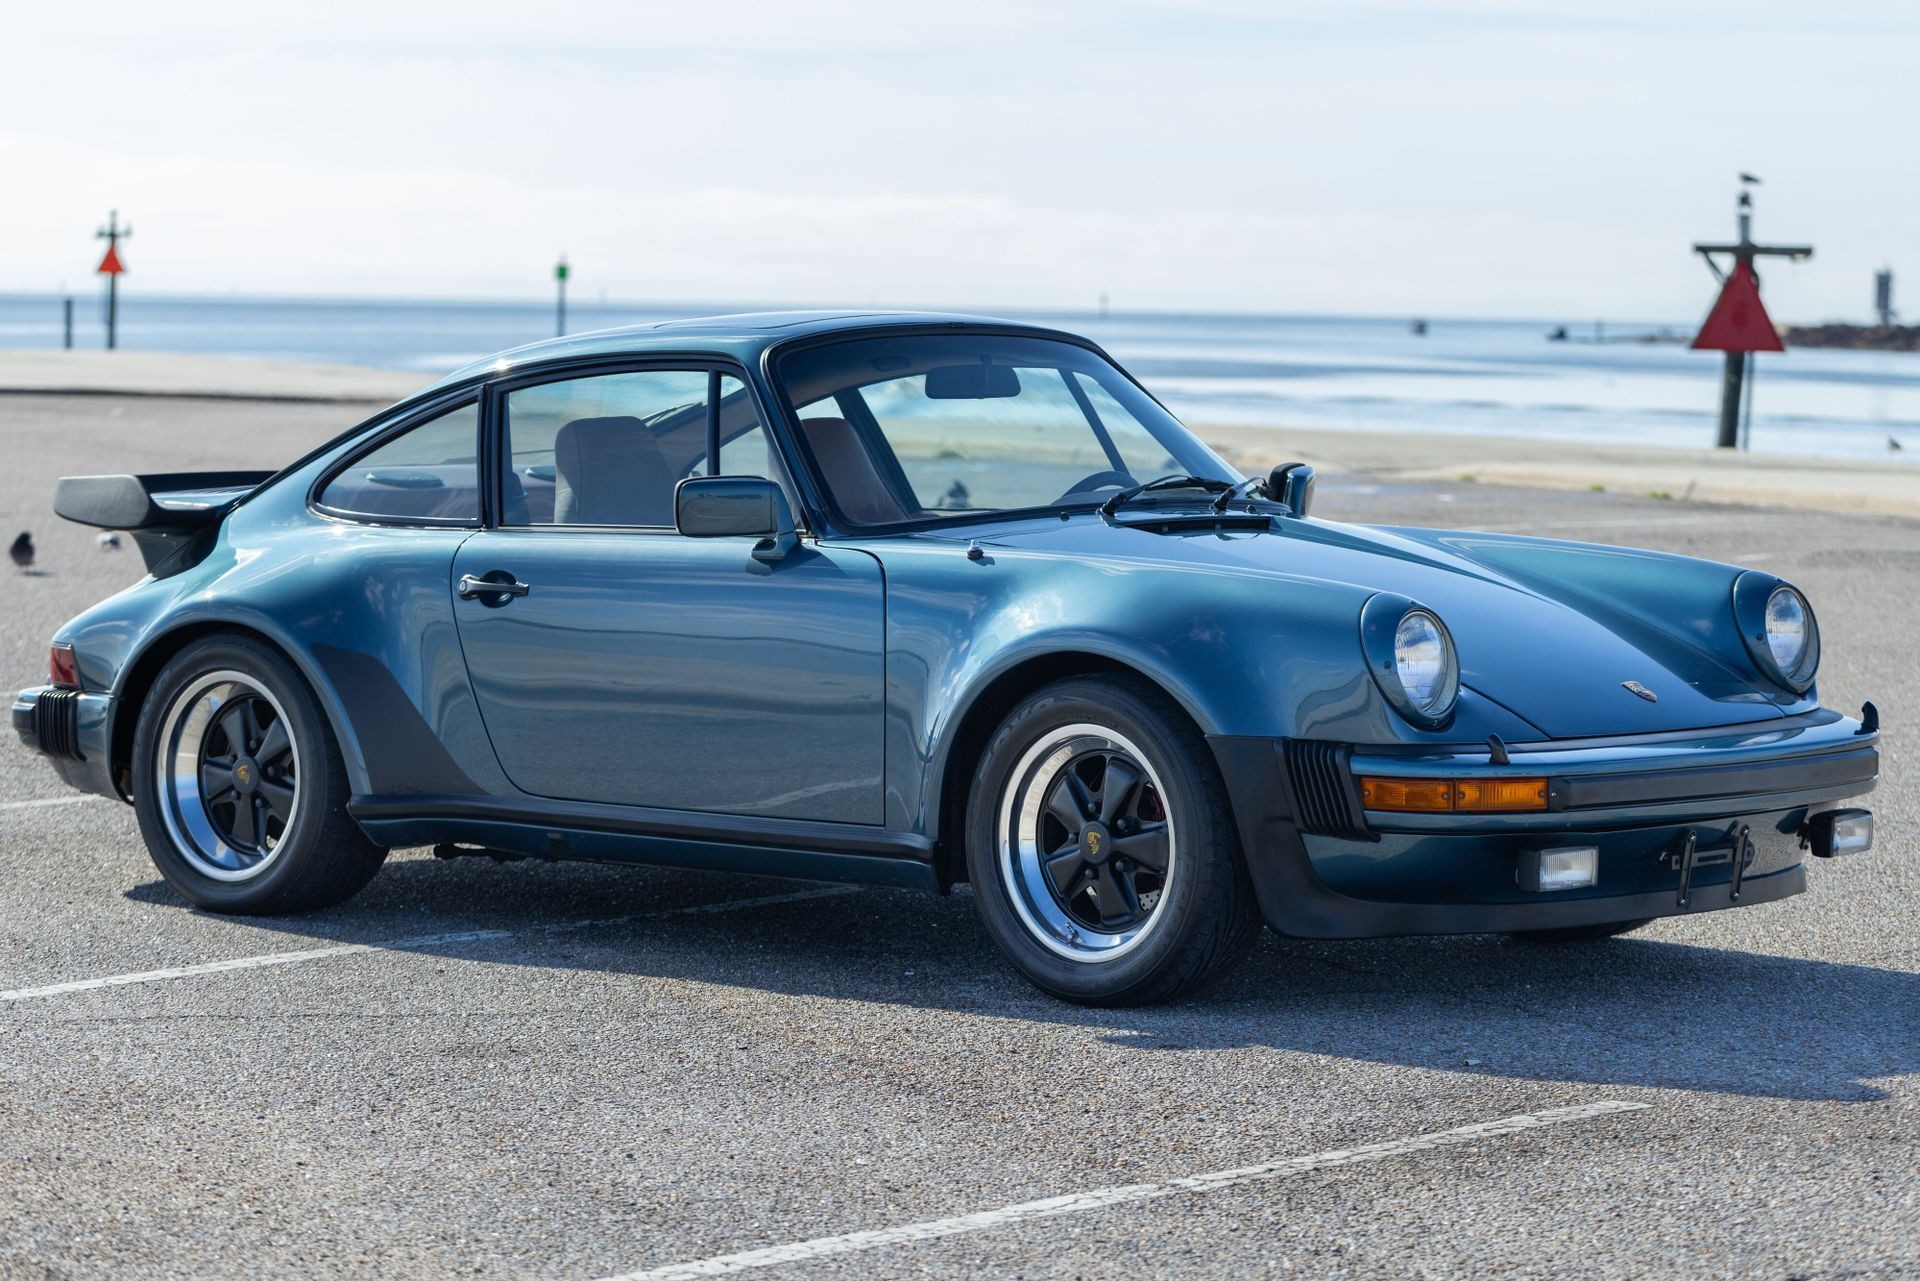 Can You Handle the Legendary Power of this Porsche 911 Turbo?